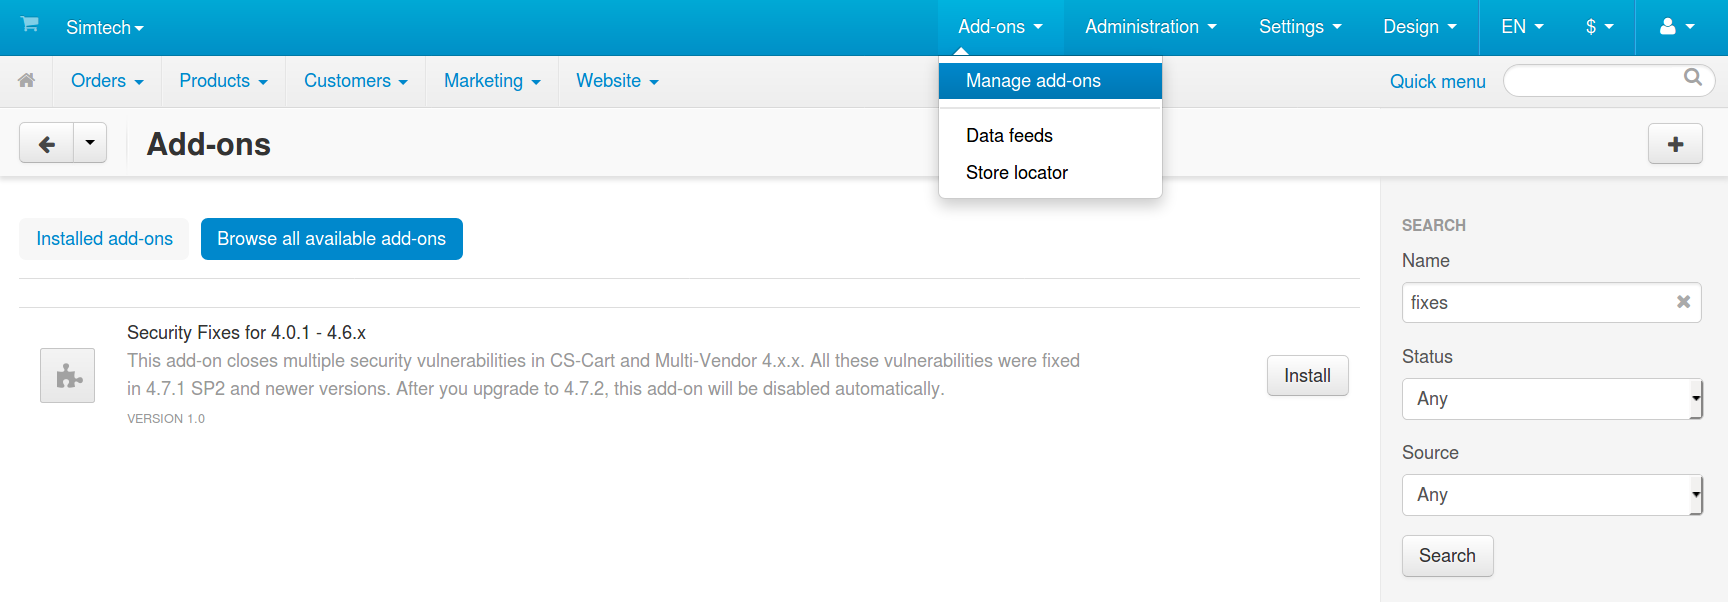 Installing an add-on in the admin panel of CS-Cart.